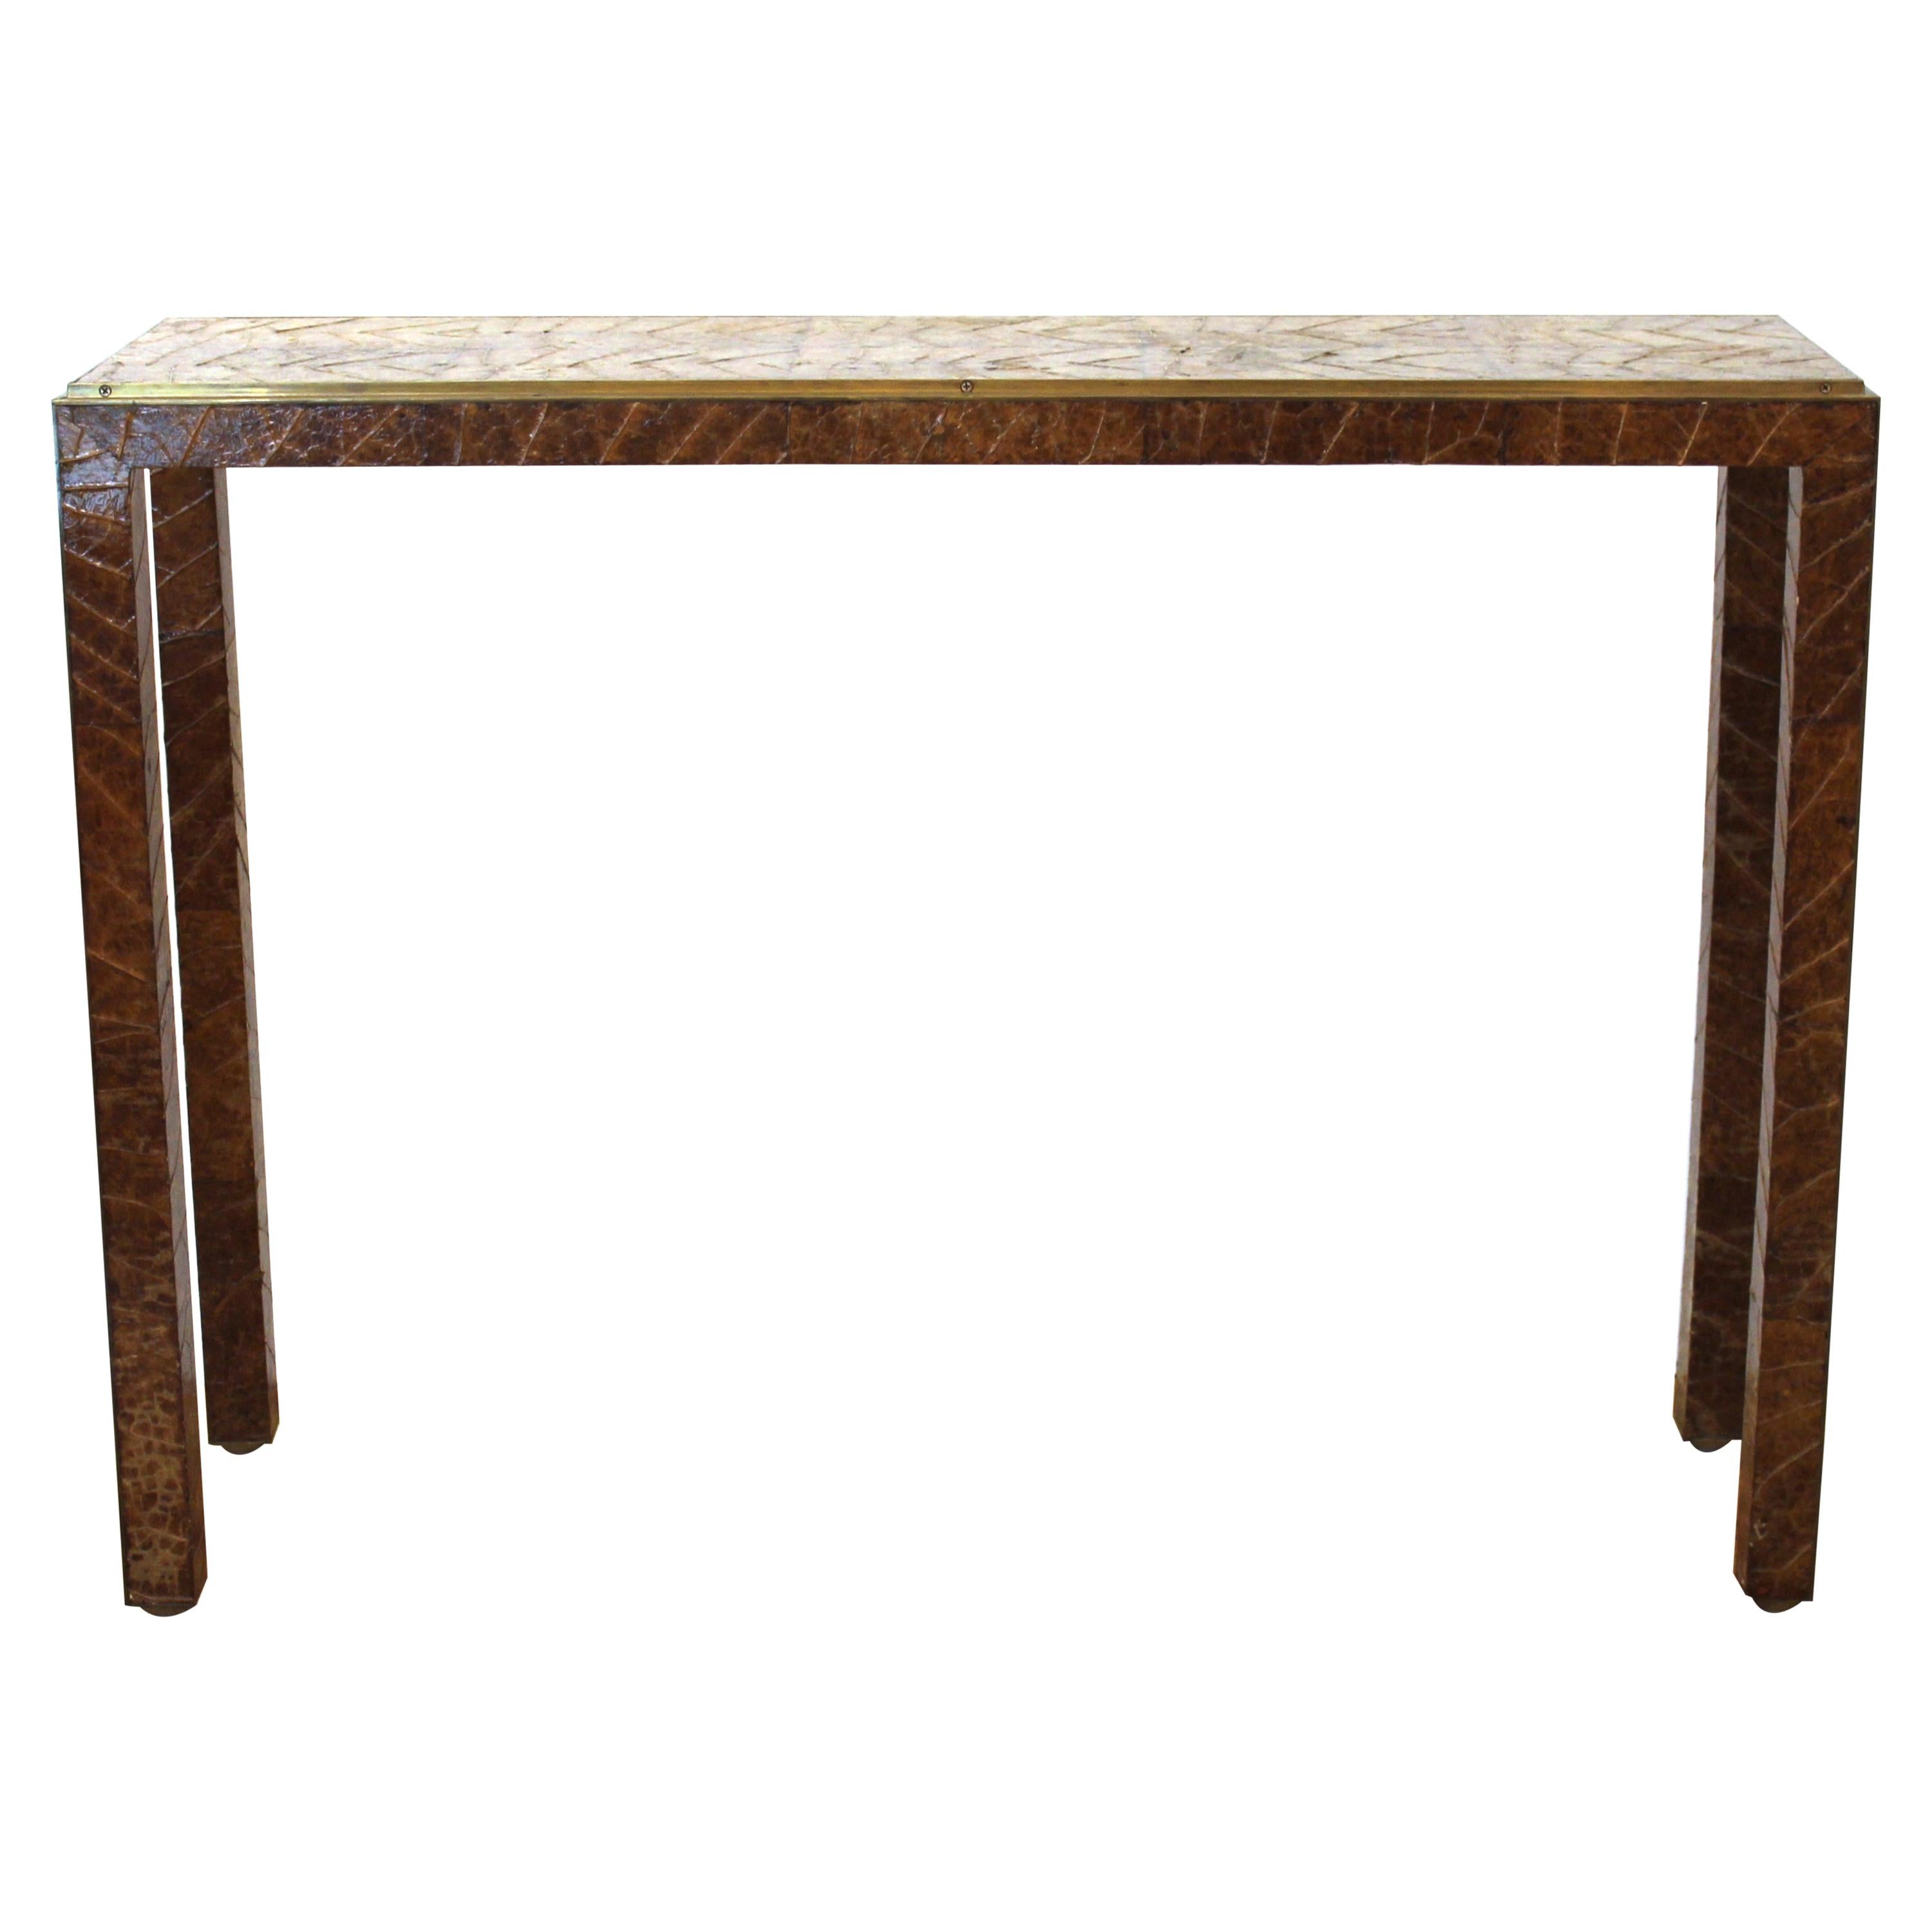 Garrison Rousseau Modern Tobacco Leaves Console Table